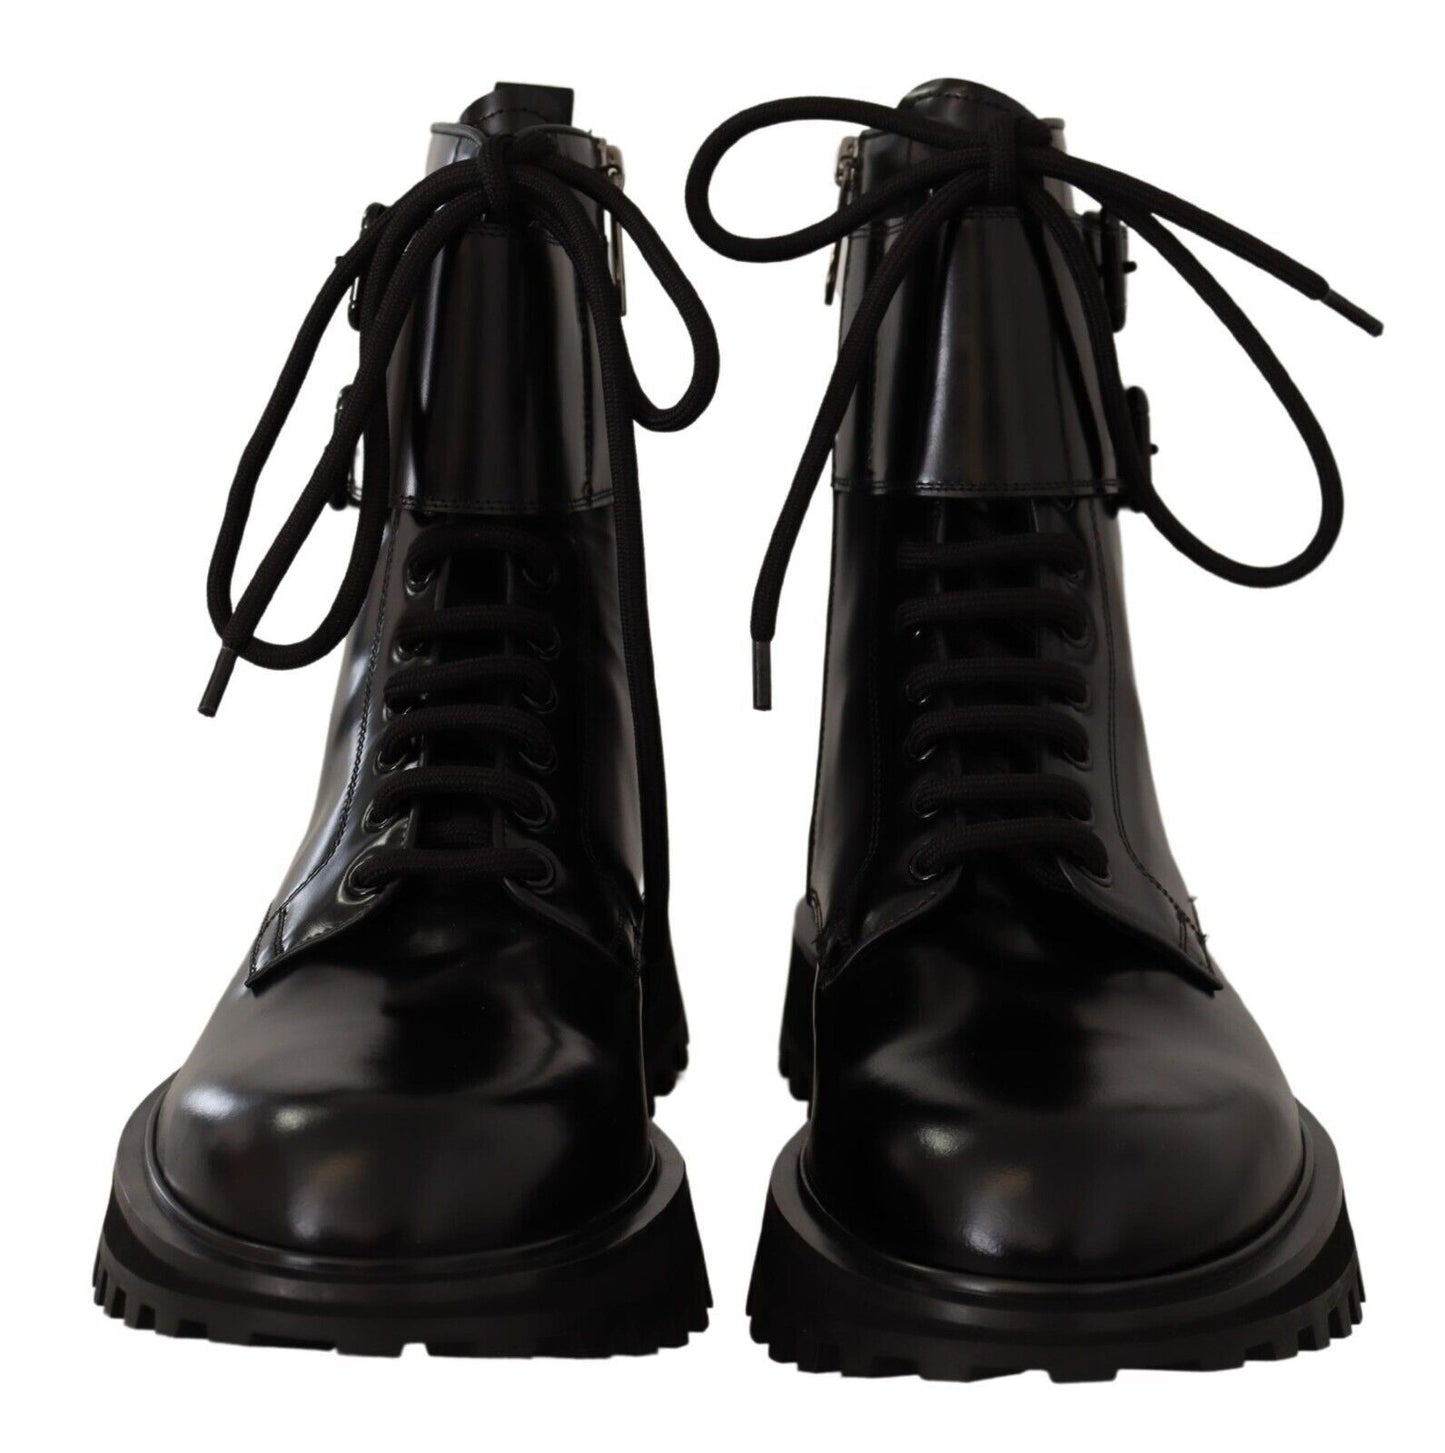 Dolce & gabbana black leather ankle boots